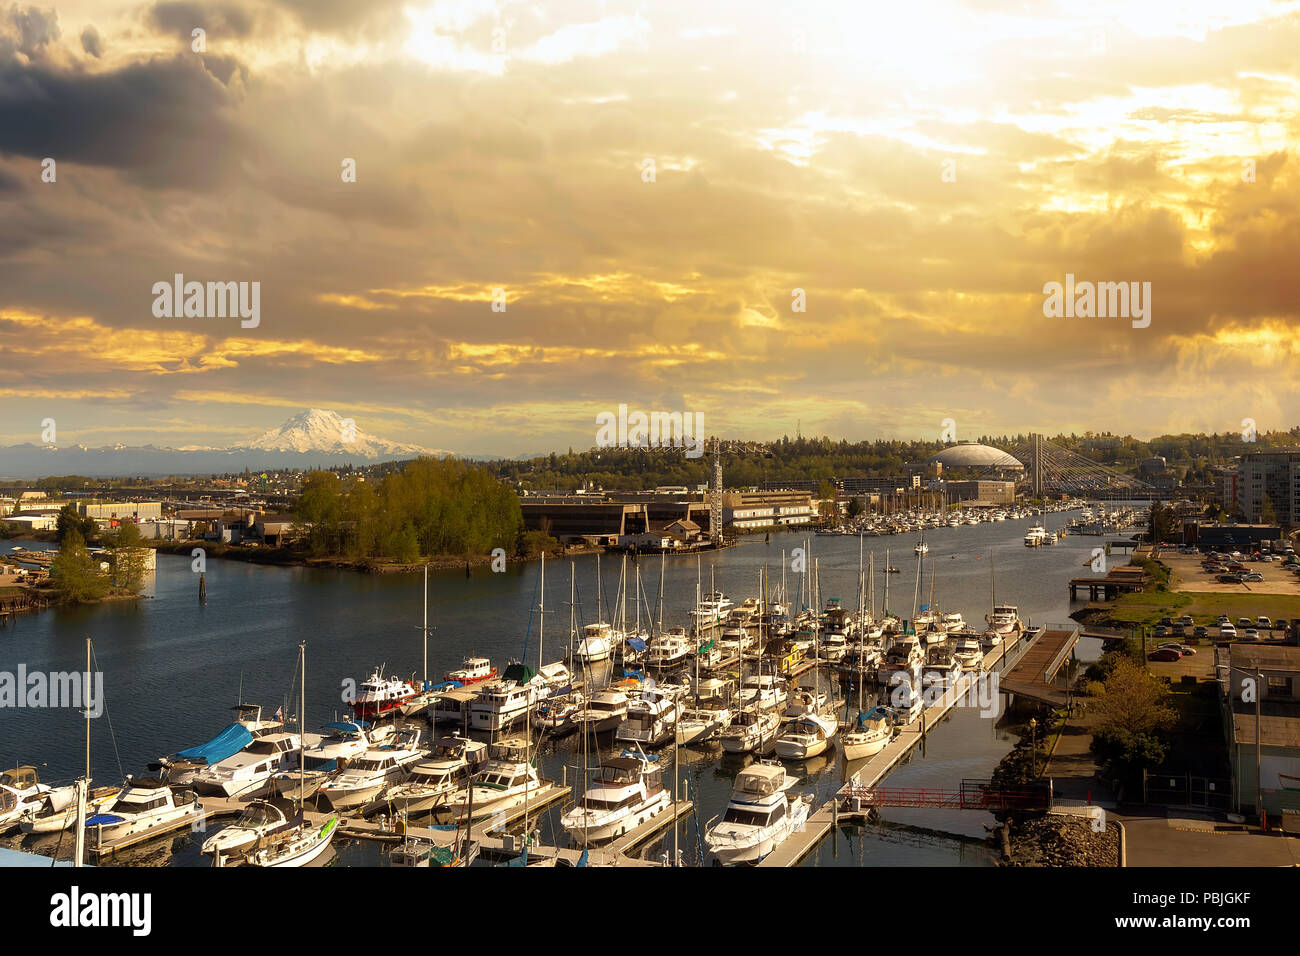 Boat Dock along Thea Foss Waterway in Tacoma Washington with Mount Rainier during golden sunset Stock Photo